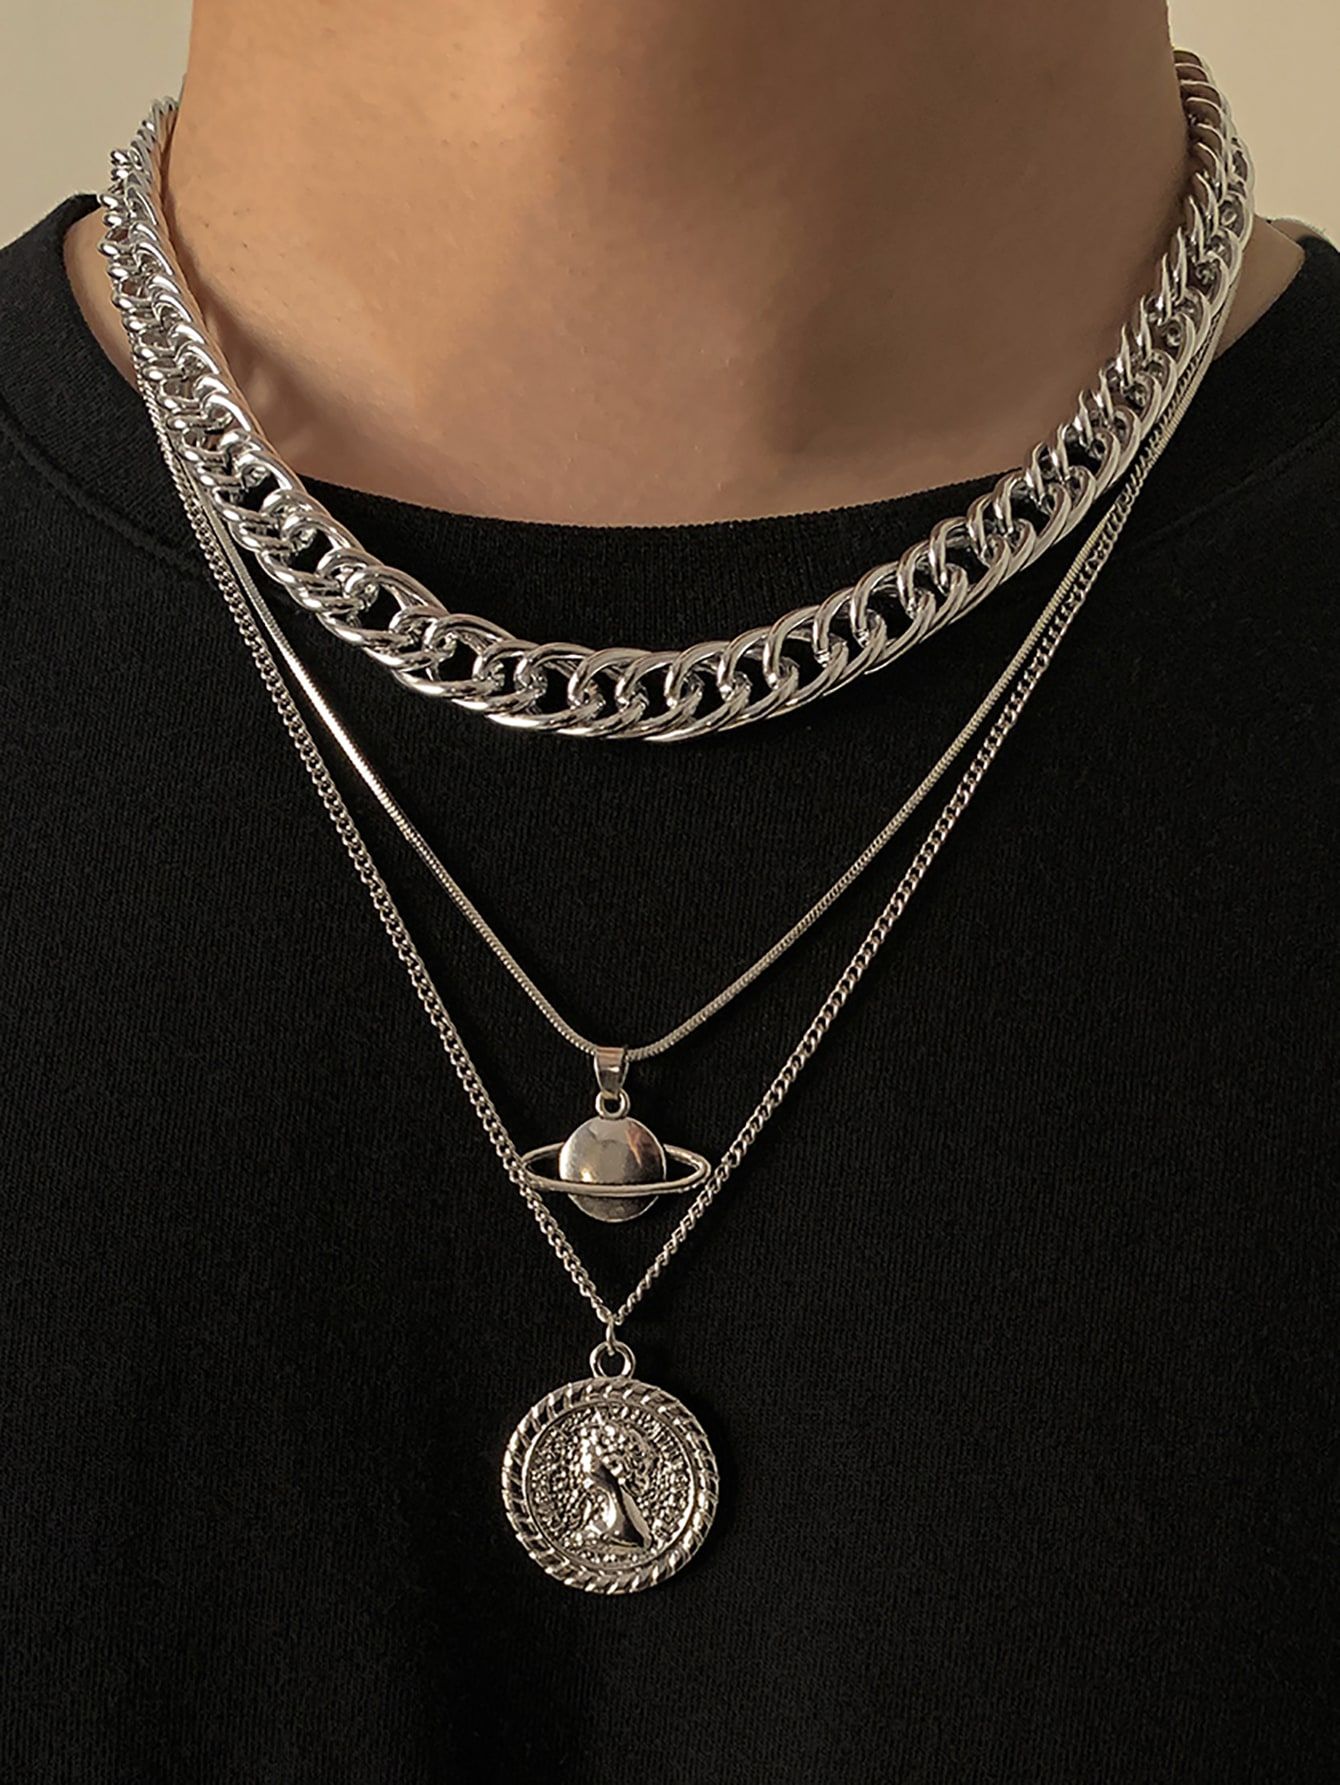 Choices are still endless in mens necklaces